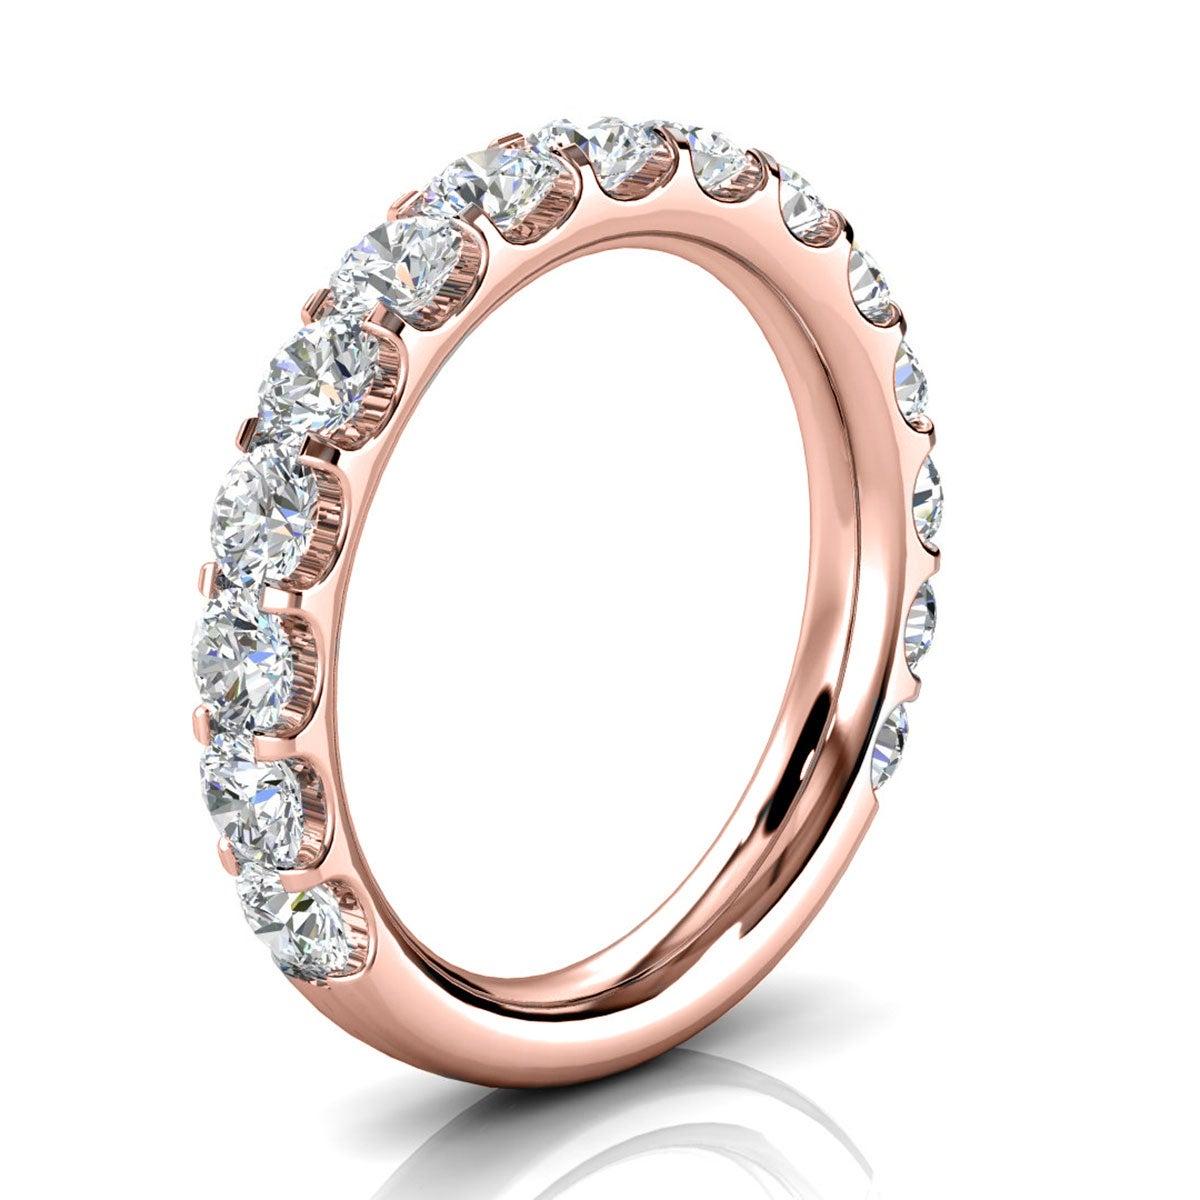 For Sale:  14k Rose Gold Carole Micro-Prong Diamond Ring '1 1/2 Ct. Tw' 2